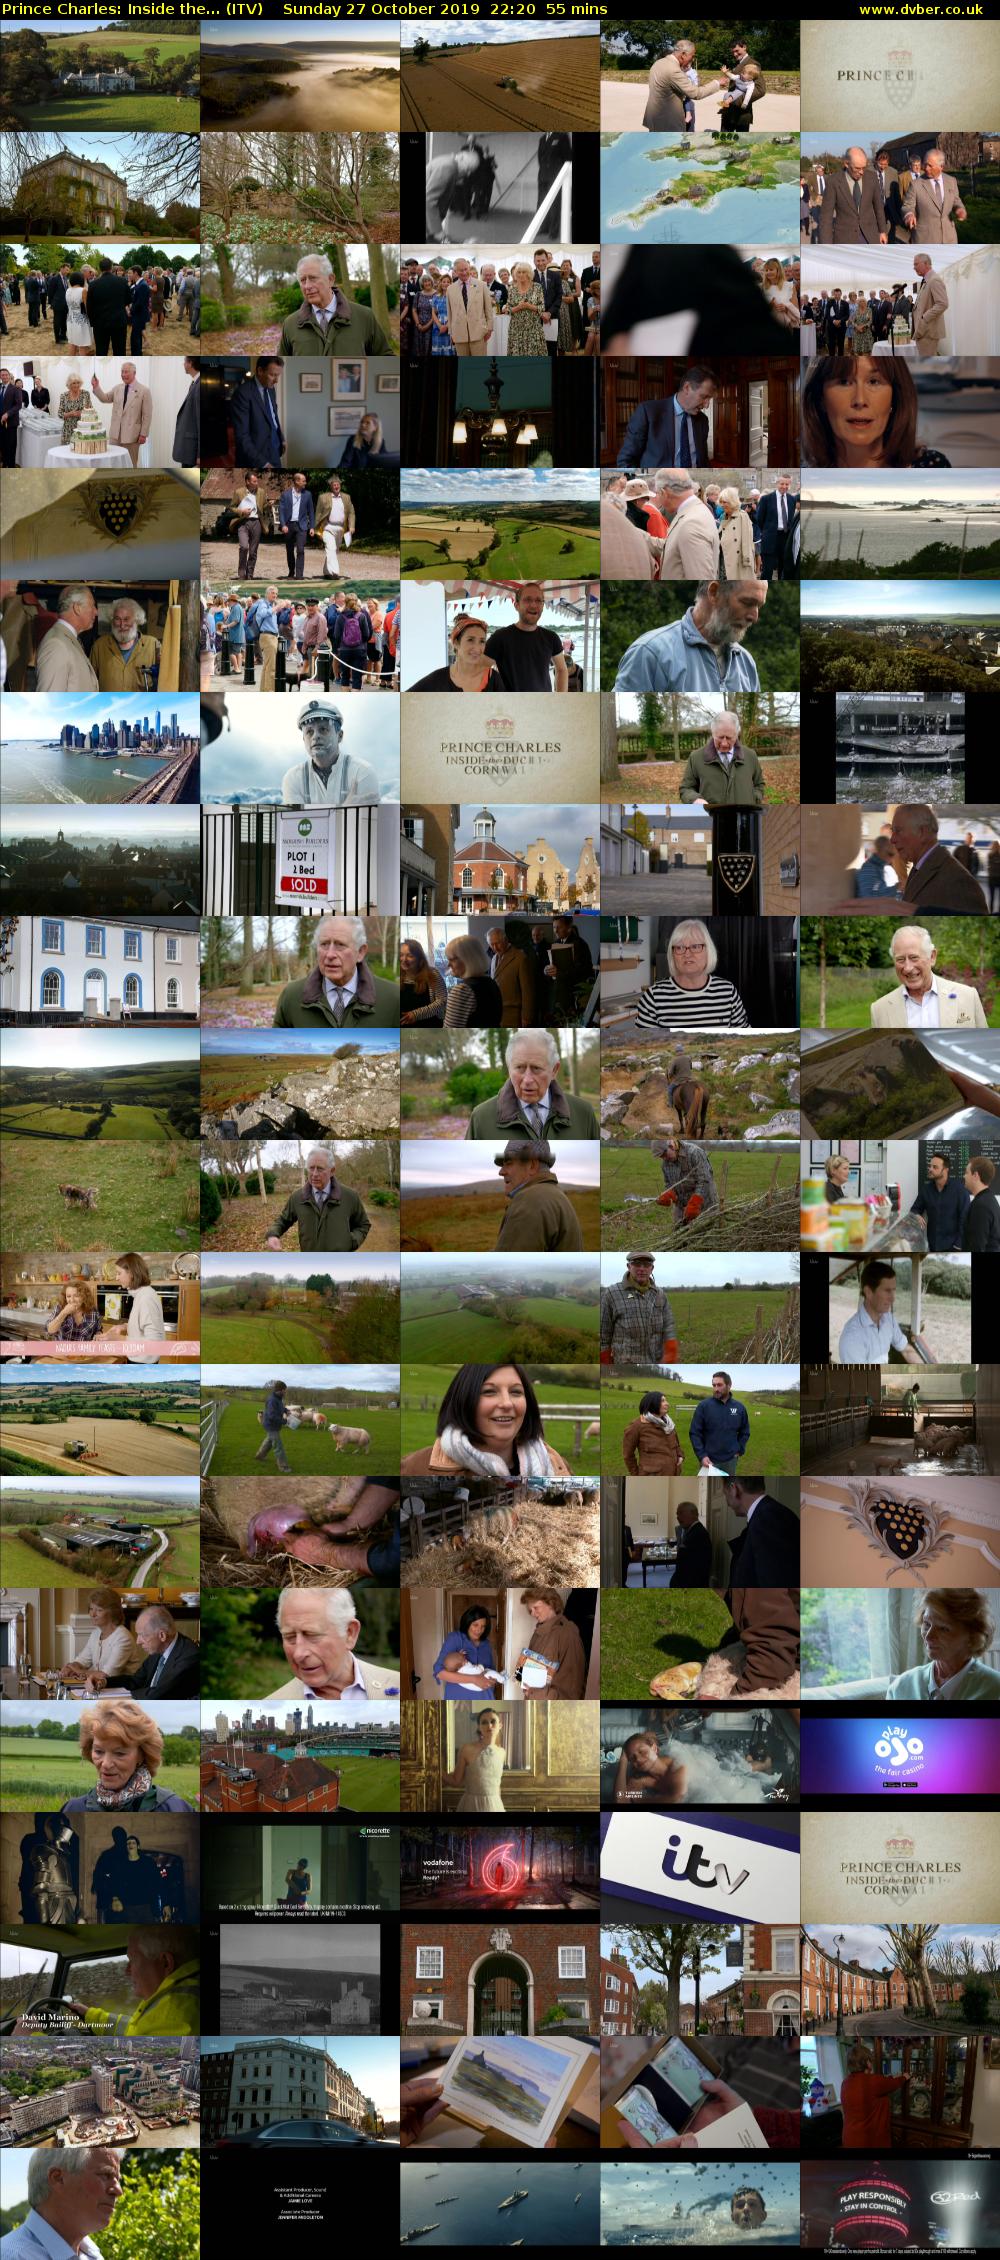 Prince Charles: Inside the... (ITV) Sunday 27 October 2019 22:20 - 23:15